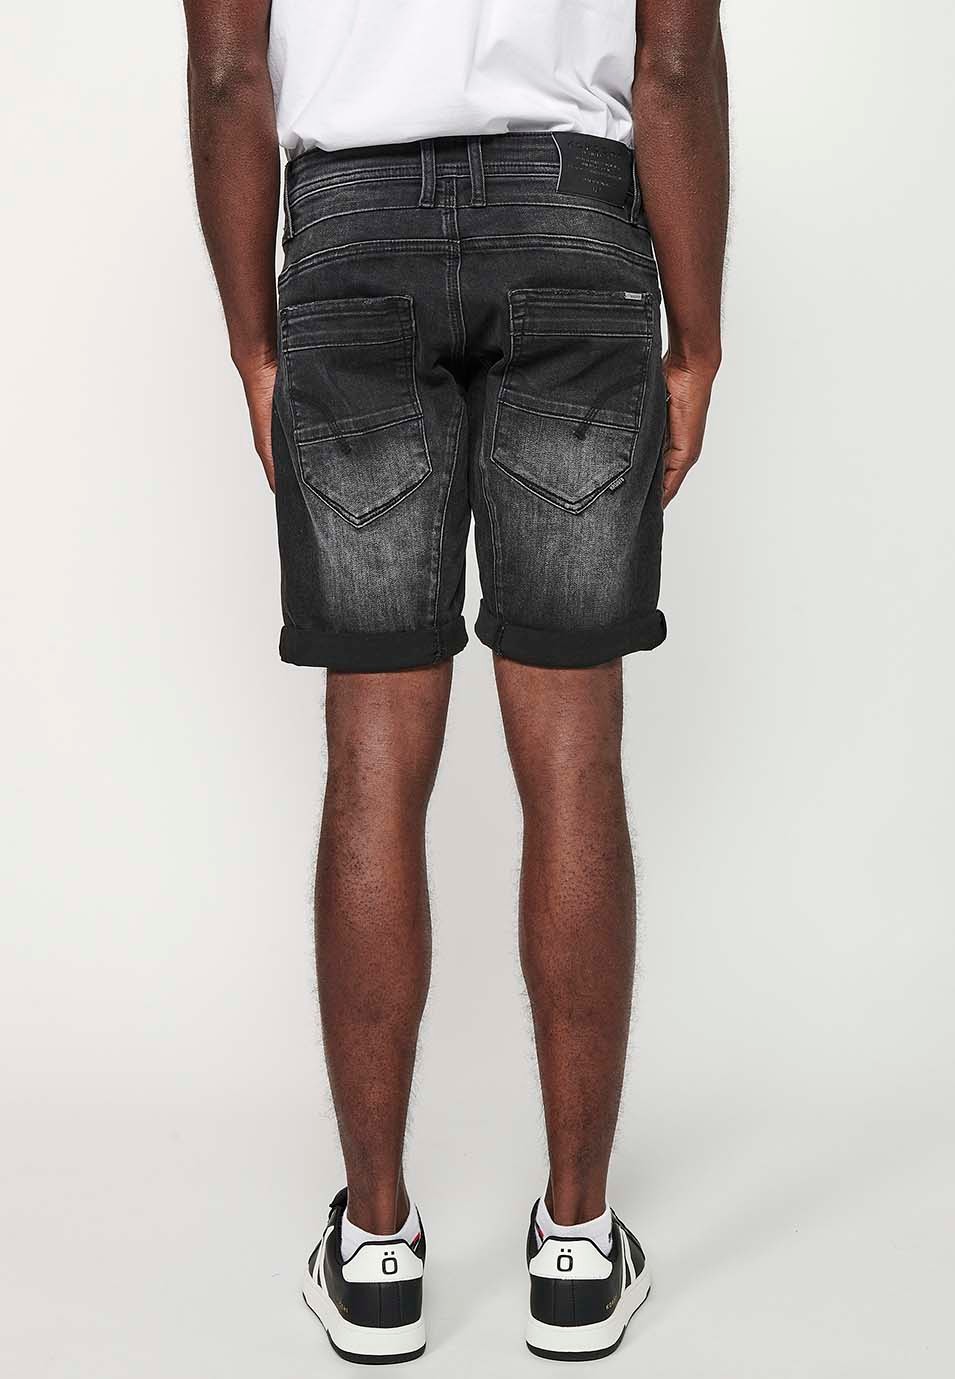 Shorts with Turn-up Finish and Front Closure with Zipper and Button with Five Pockets, One Pocket Pocket and Front Details in Black for Men 9